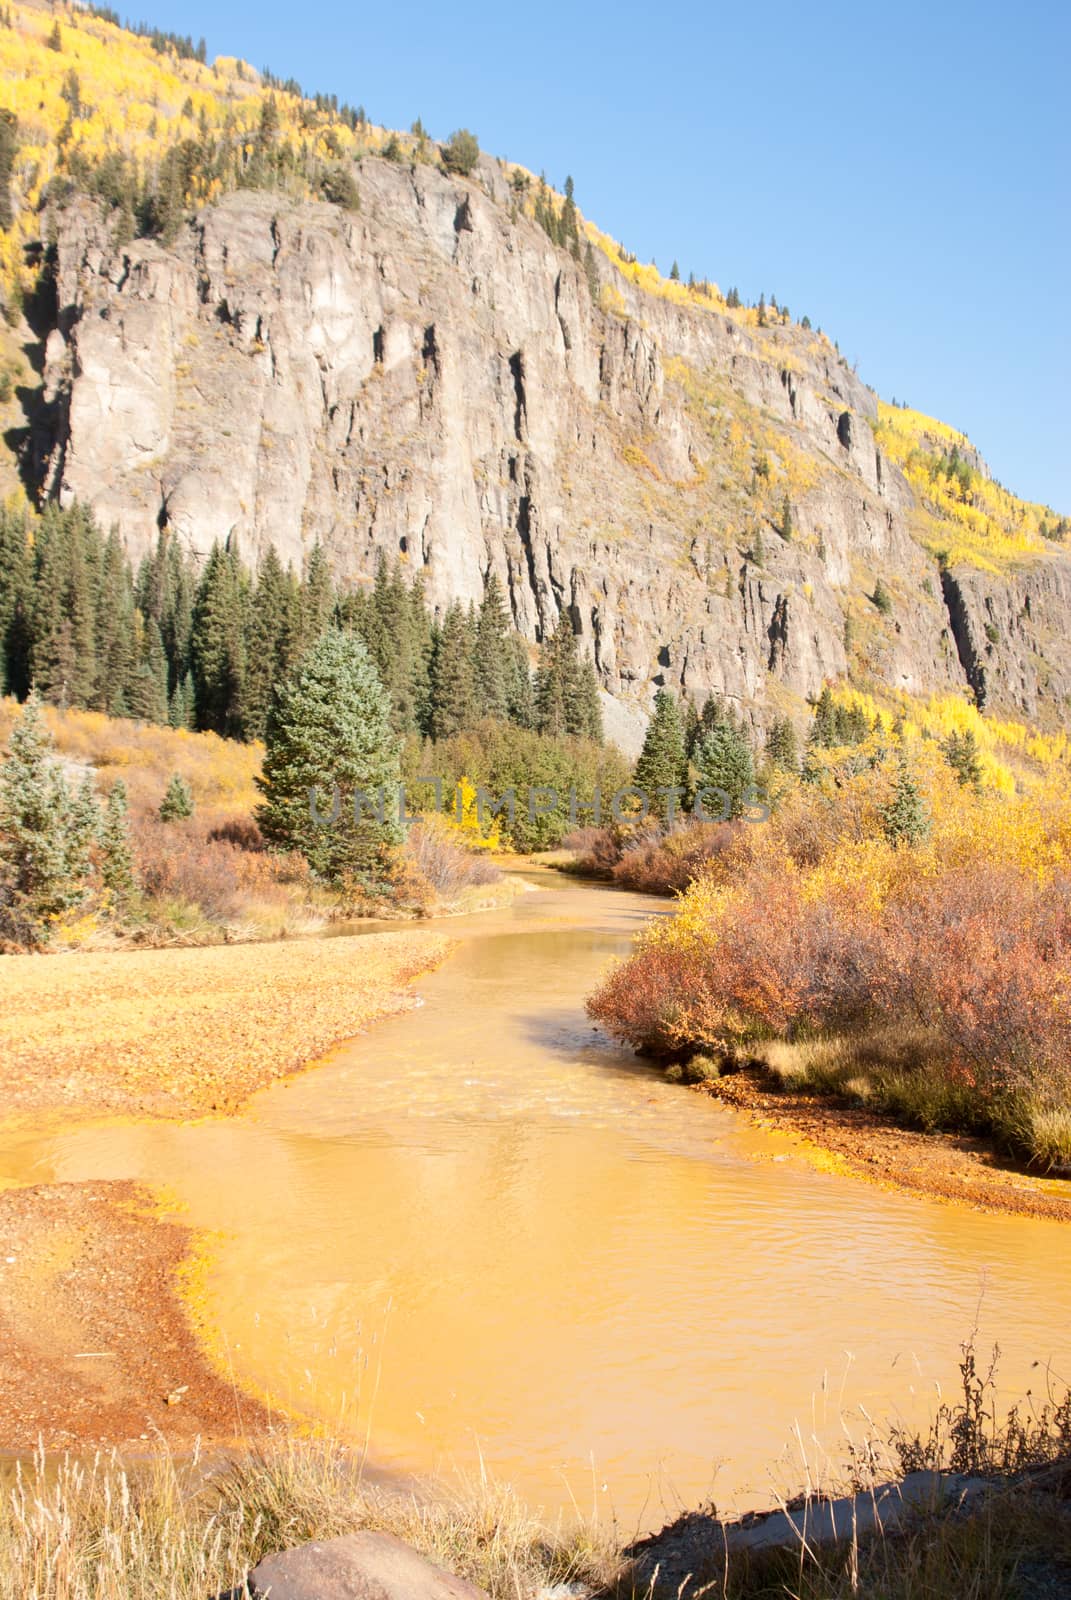 Muddy yellow river in Colorado by emattil